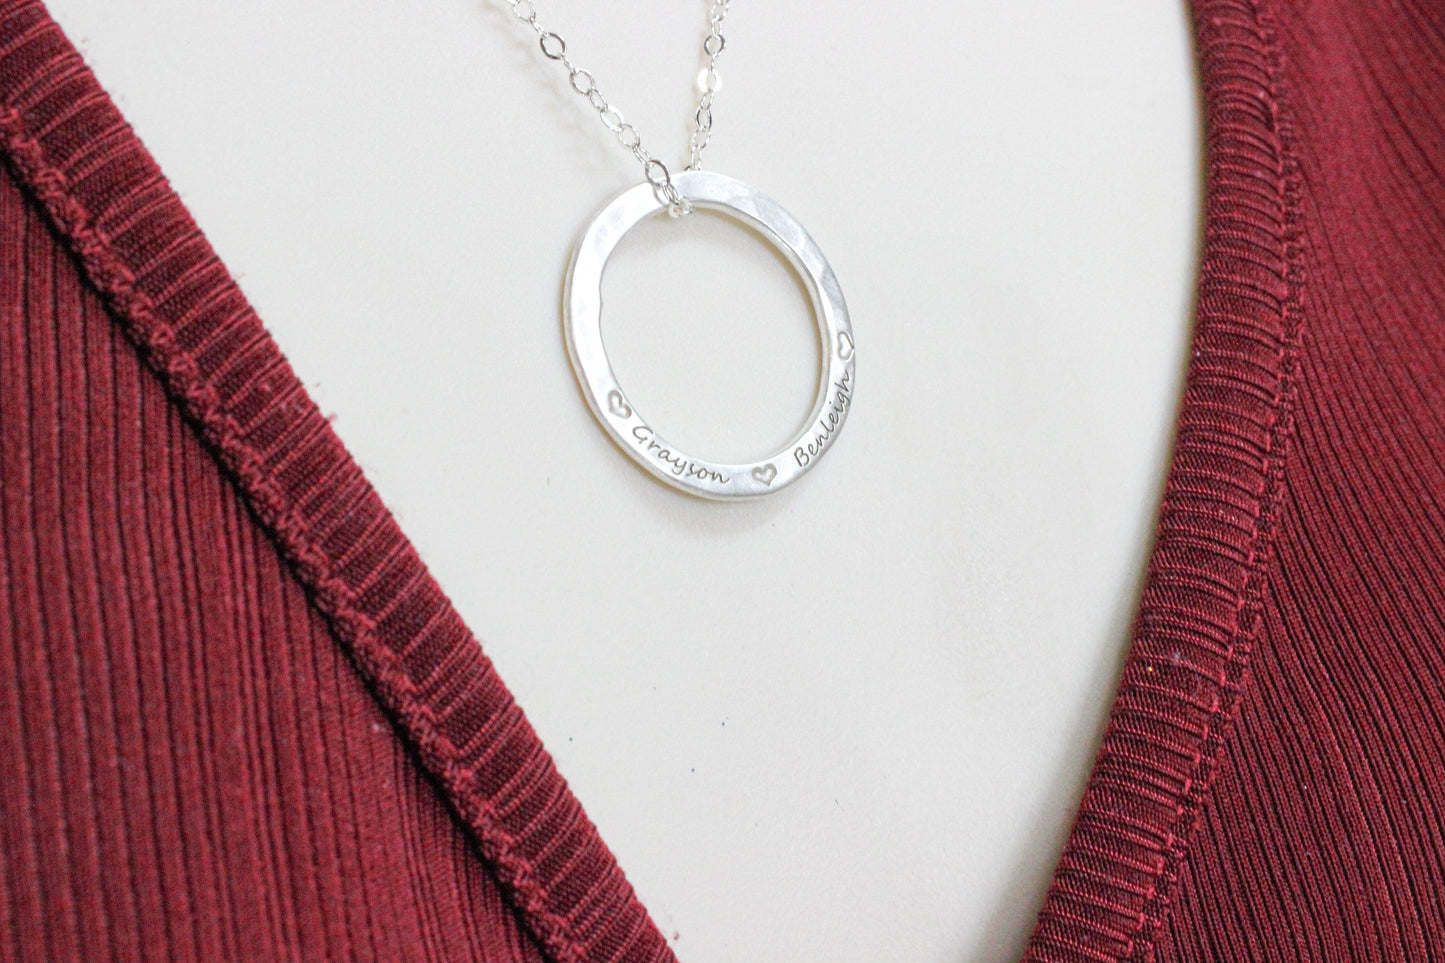 Sterling Silver Circle Name Necklace | Custom Engraved Necklace Pendant | Handmade Personalized Jewelry